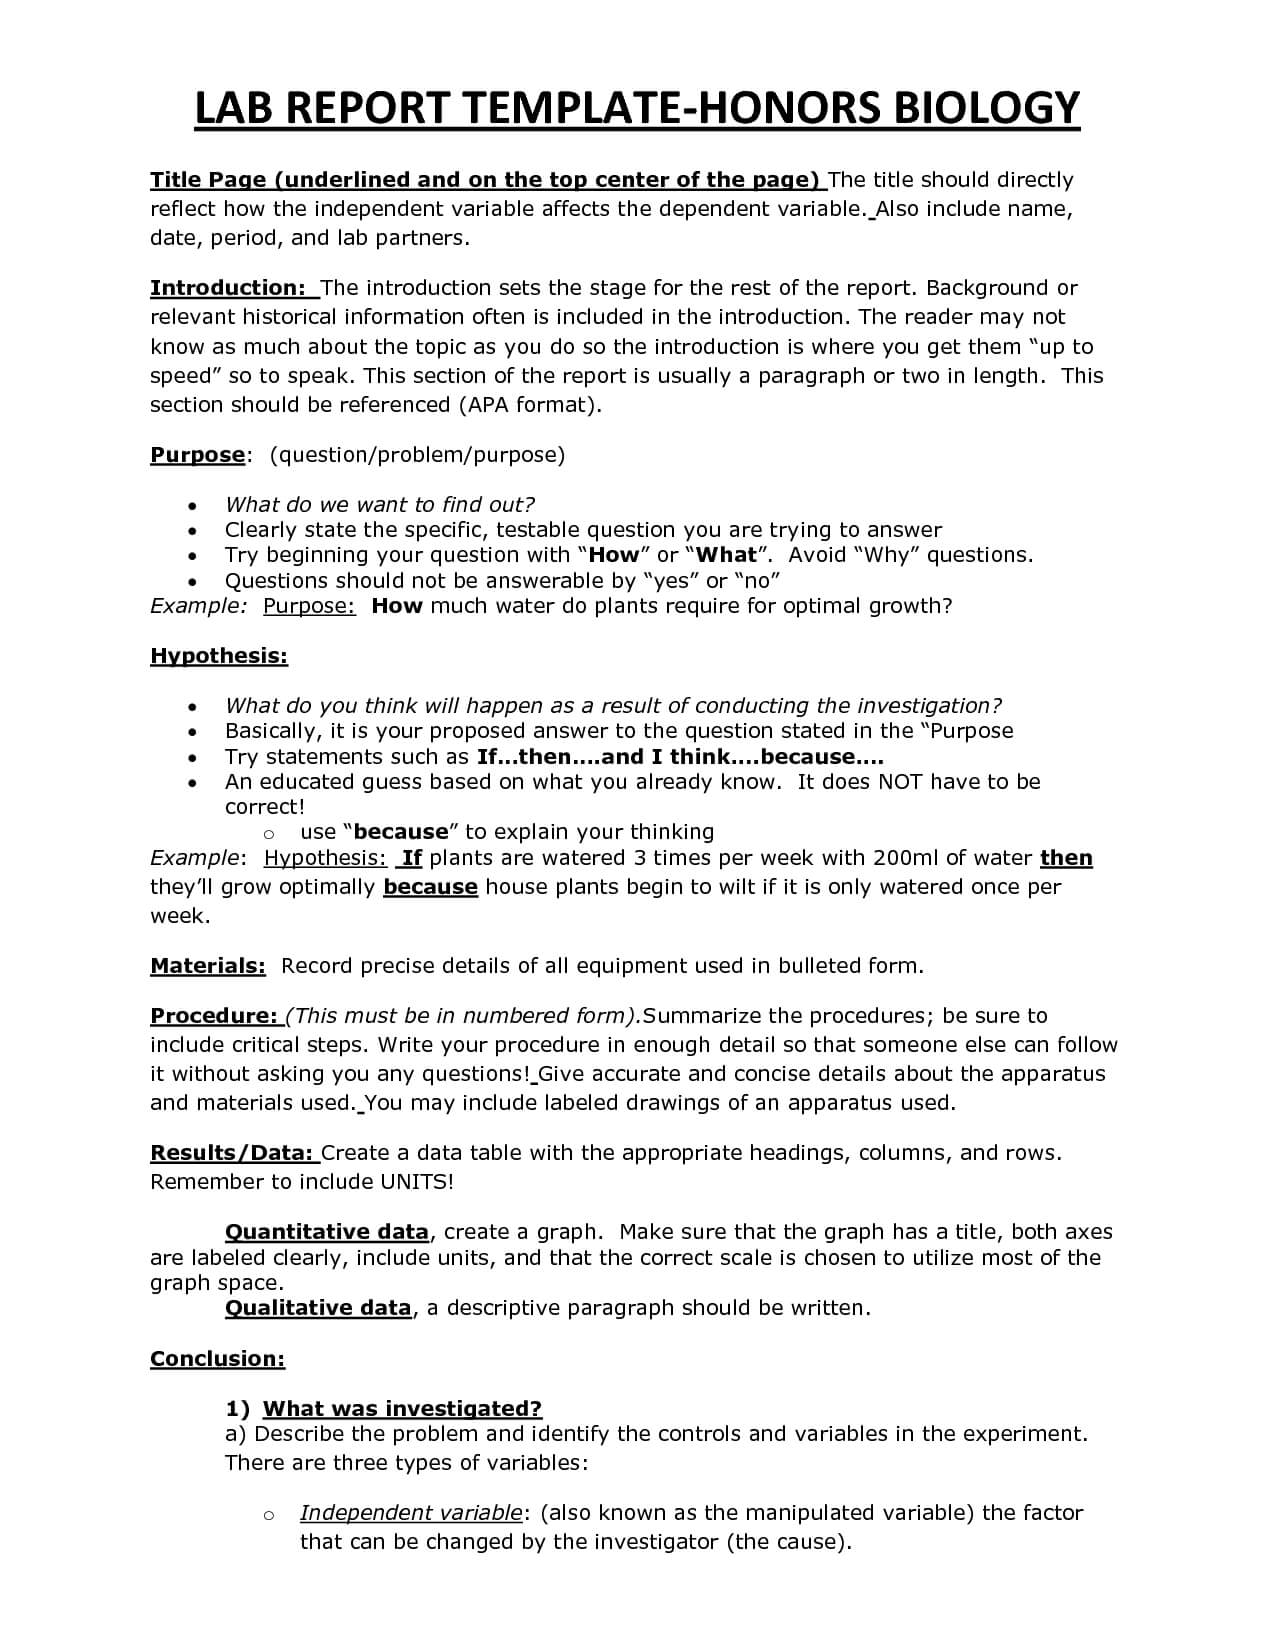 Chs Hbio Lab Report Template | Biology | Lab Report Template Regarding Introduction Template For Report